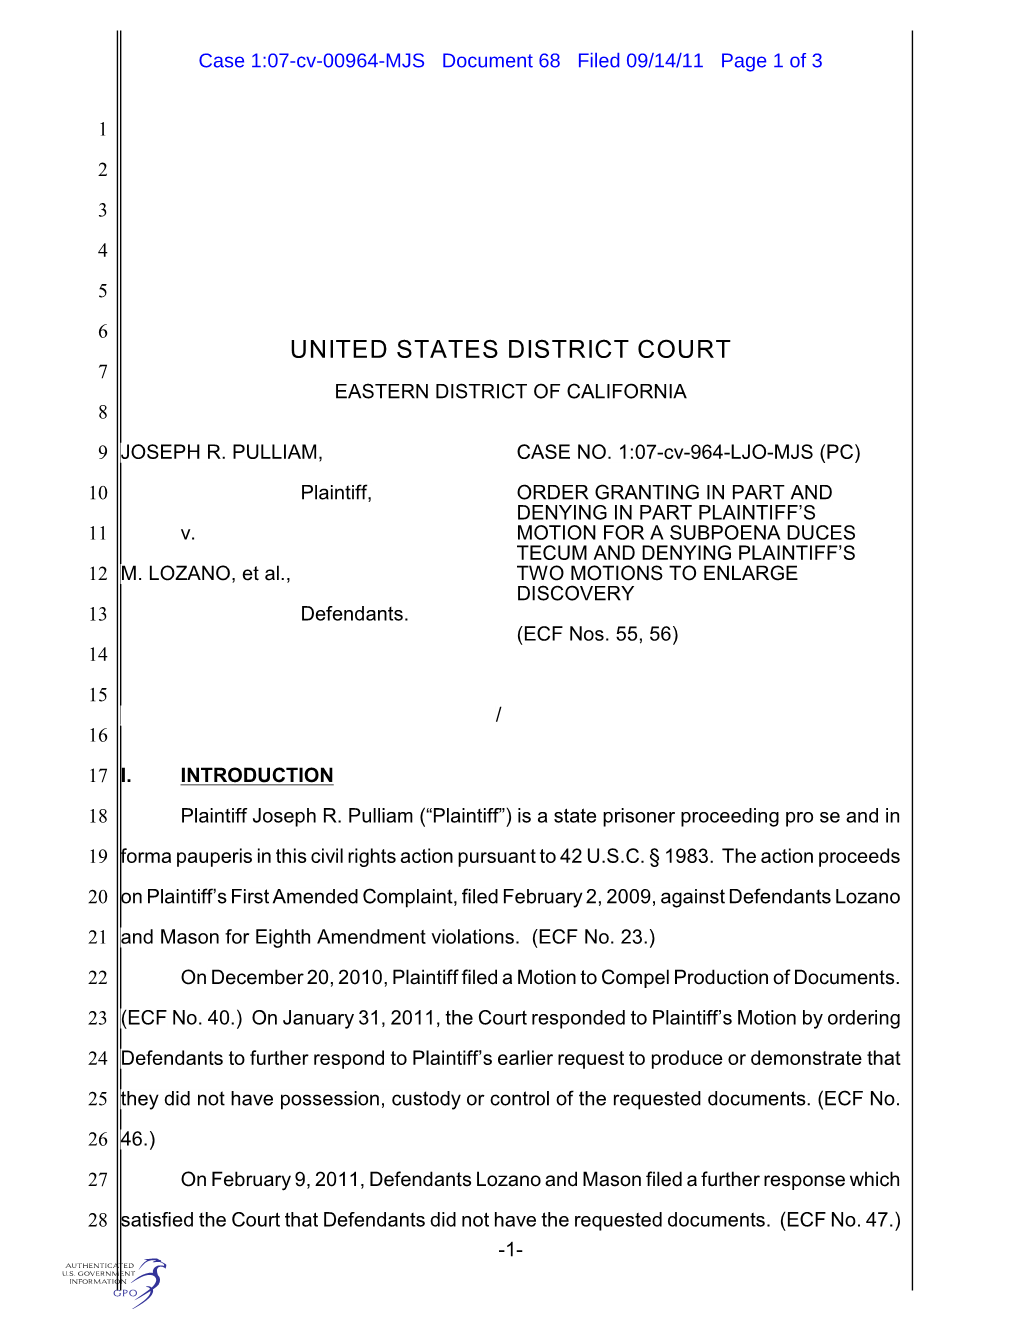 United States District Court 7 Eastern District of California 8